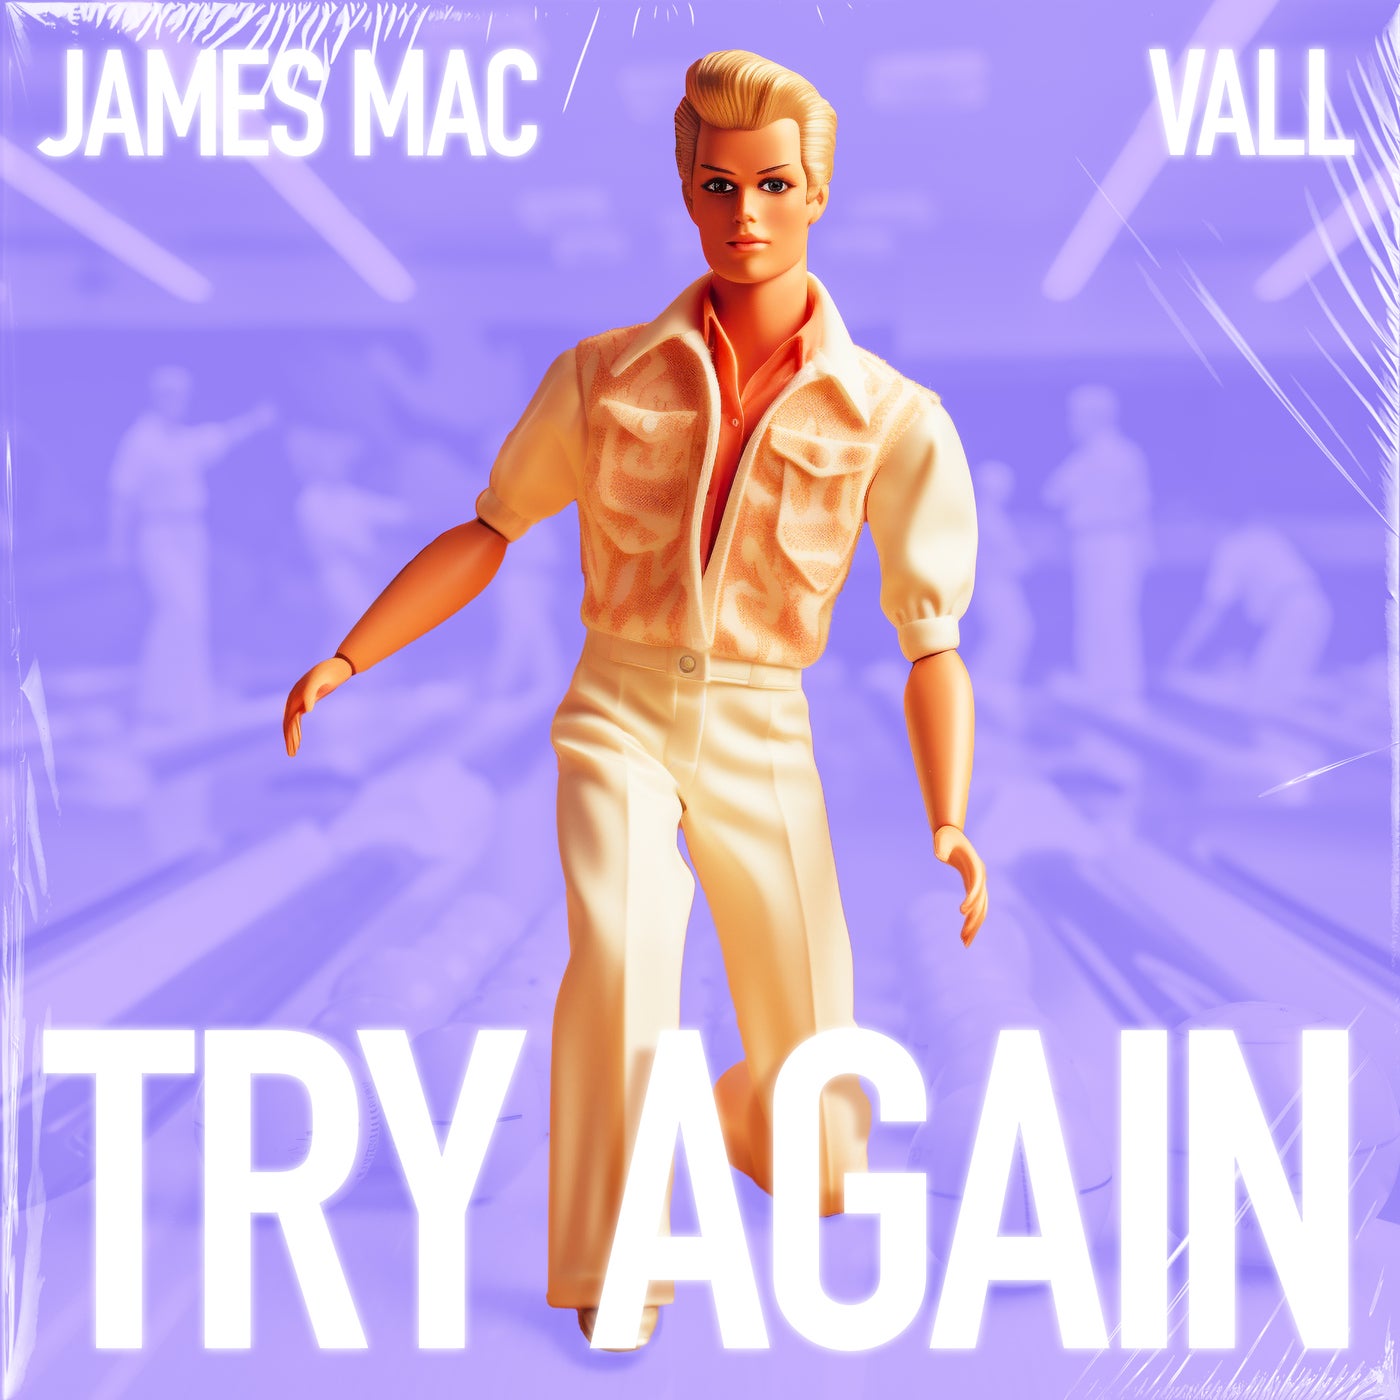 James Mac x Vall - Try Again (Extended Mix)